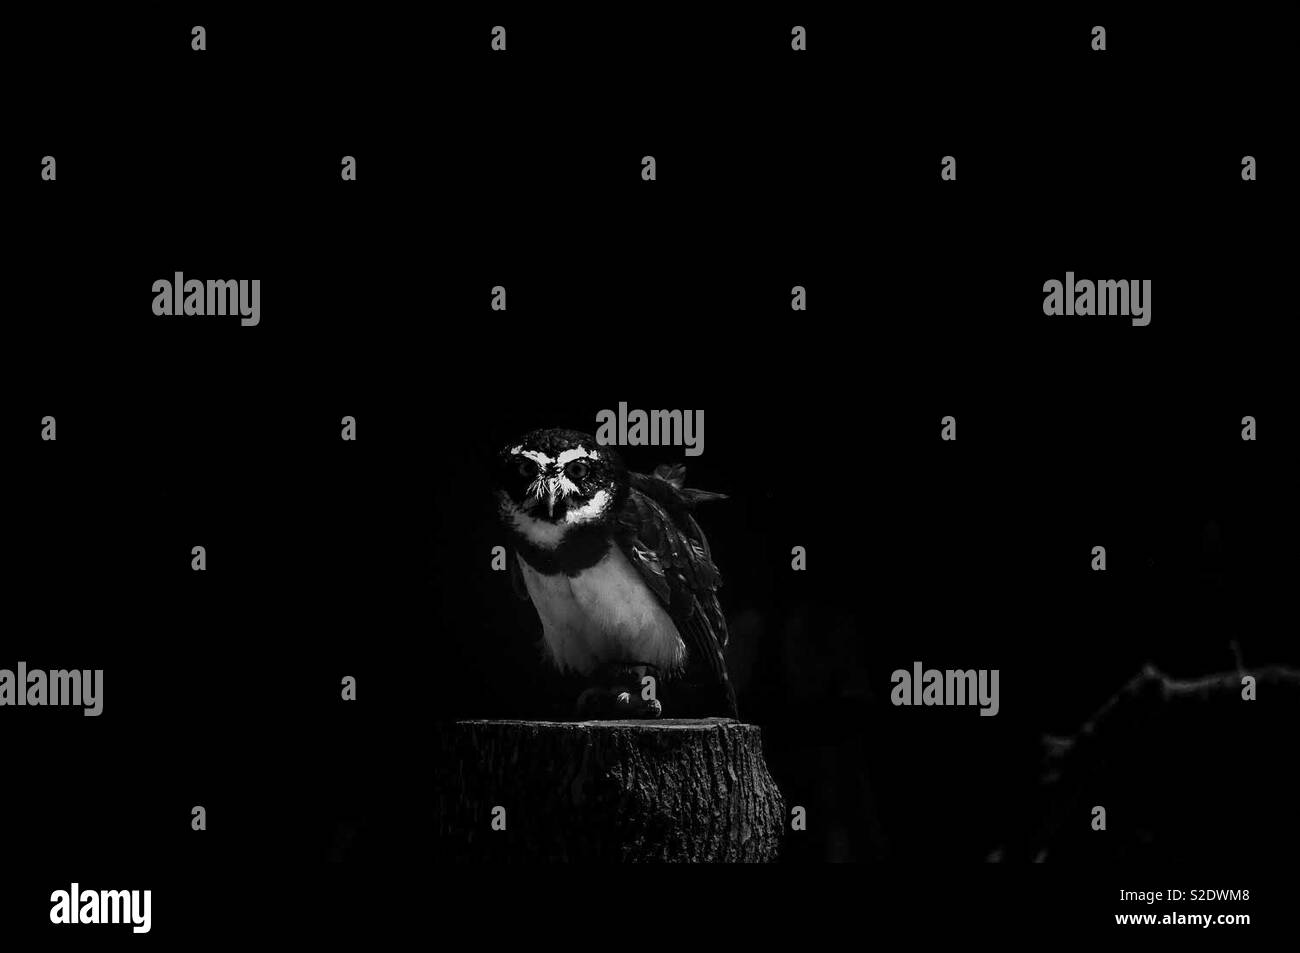 Owl in the dark staring at the camera. Stock Photo